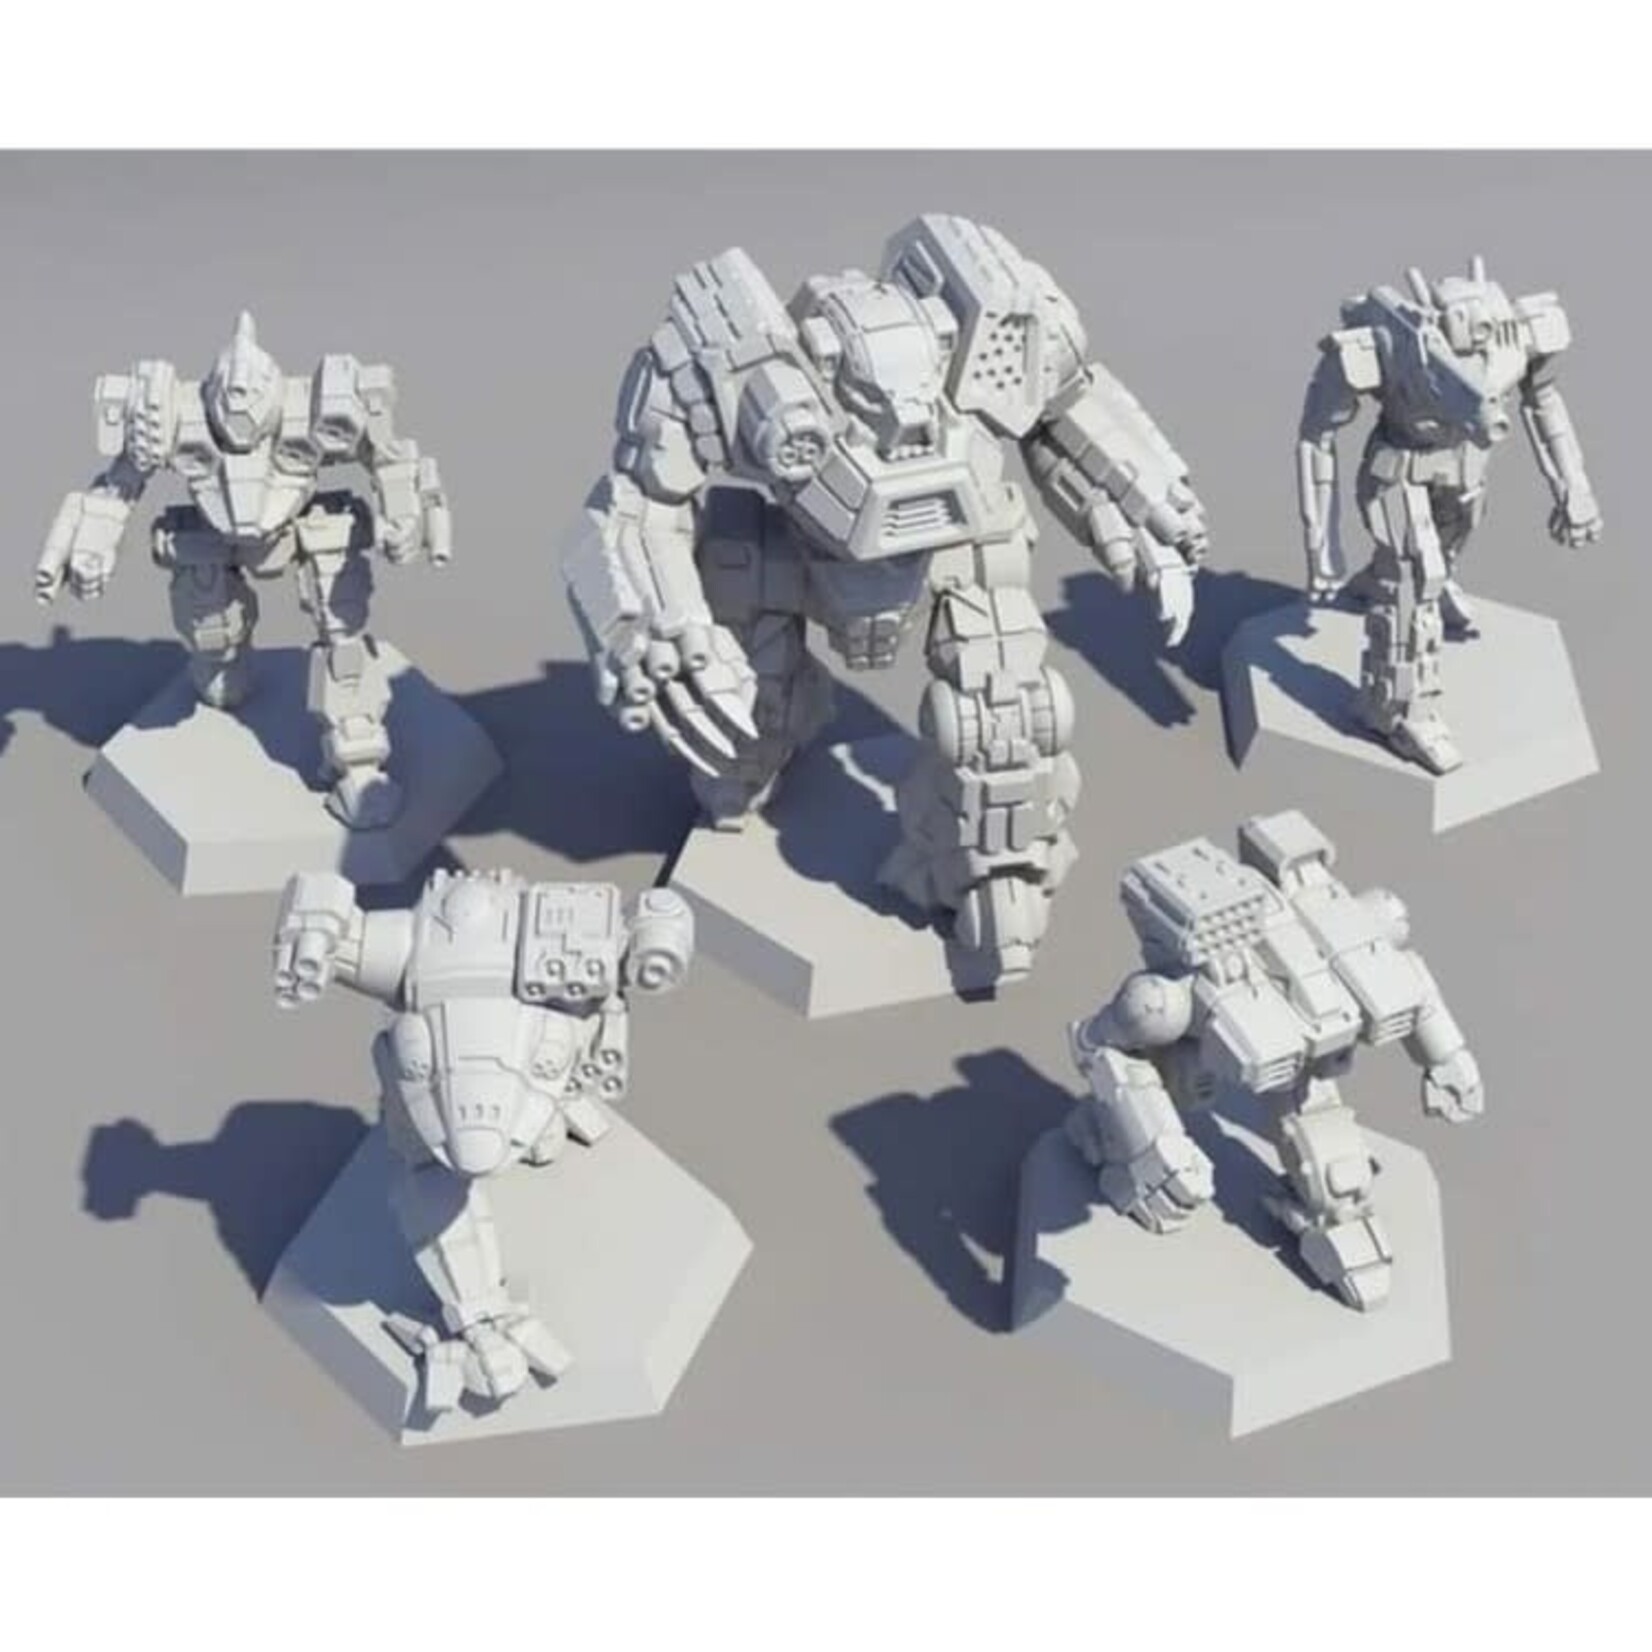 Catalyst Game Labs Battletech Miniature Force Pack Clan Ad Hoc Star